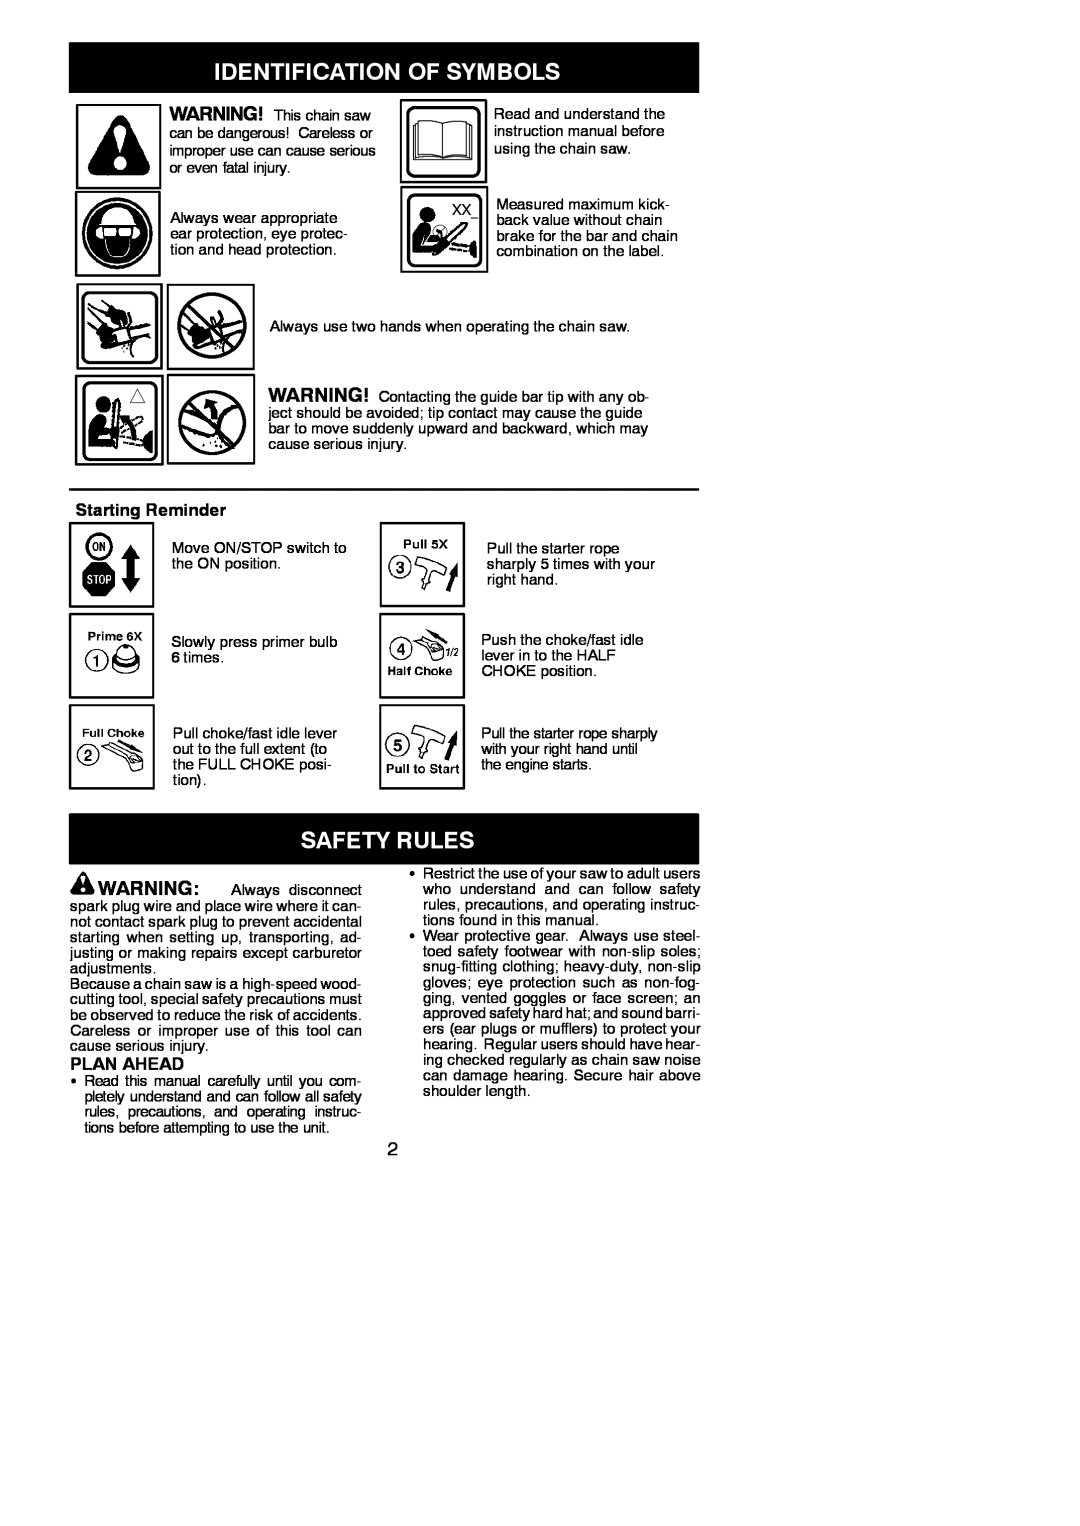 Poulan 545047515 instruction manual Identification Of Symbols, Safety Rules, Starting Reminder, Plan Ahead 